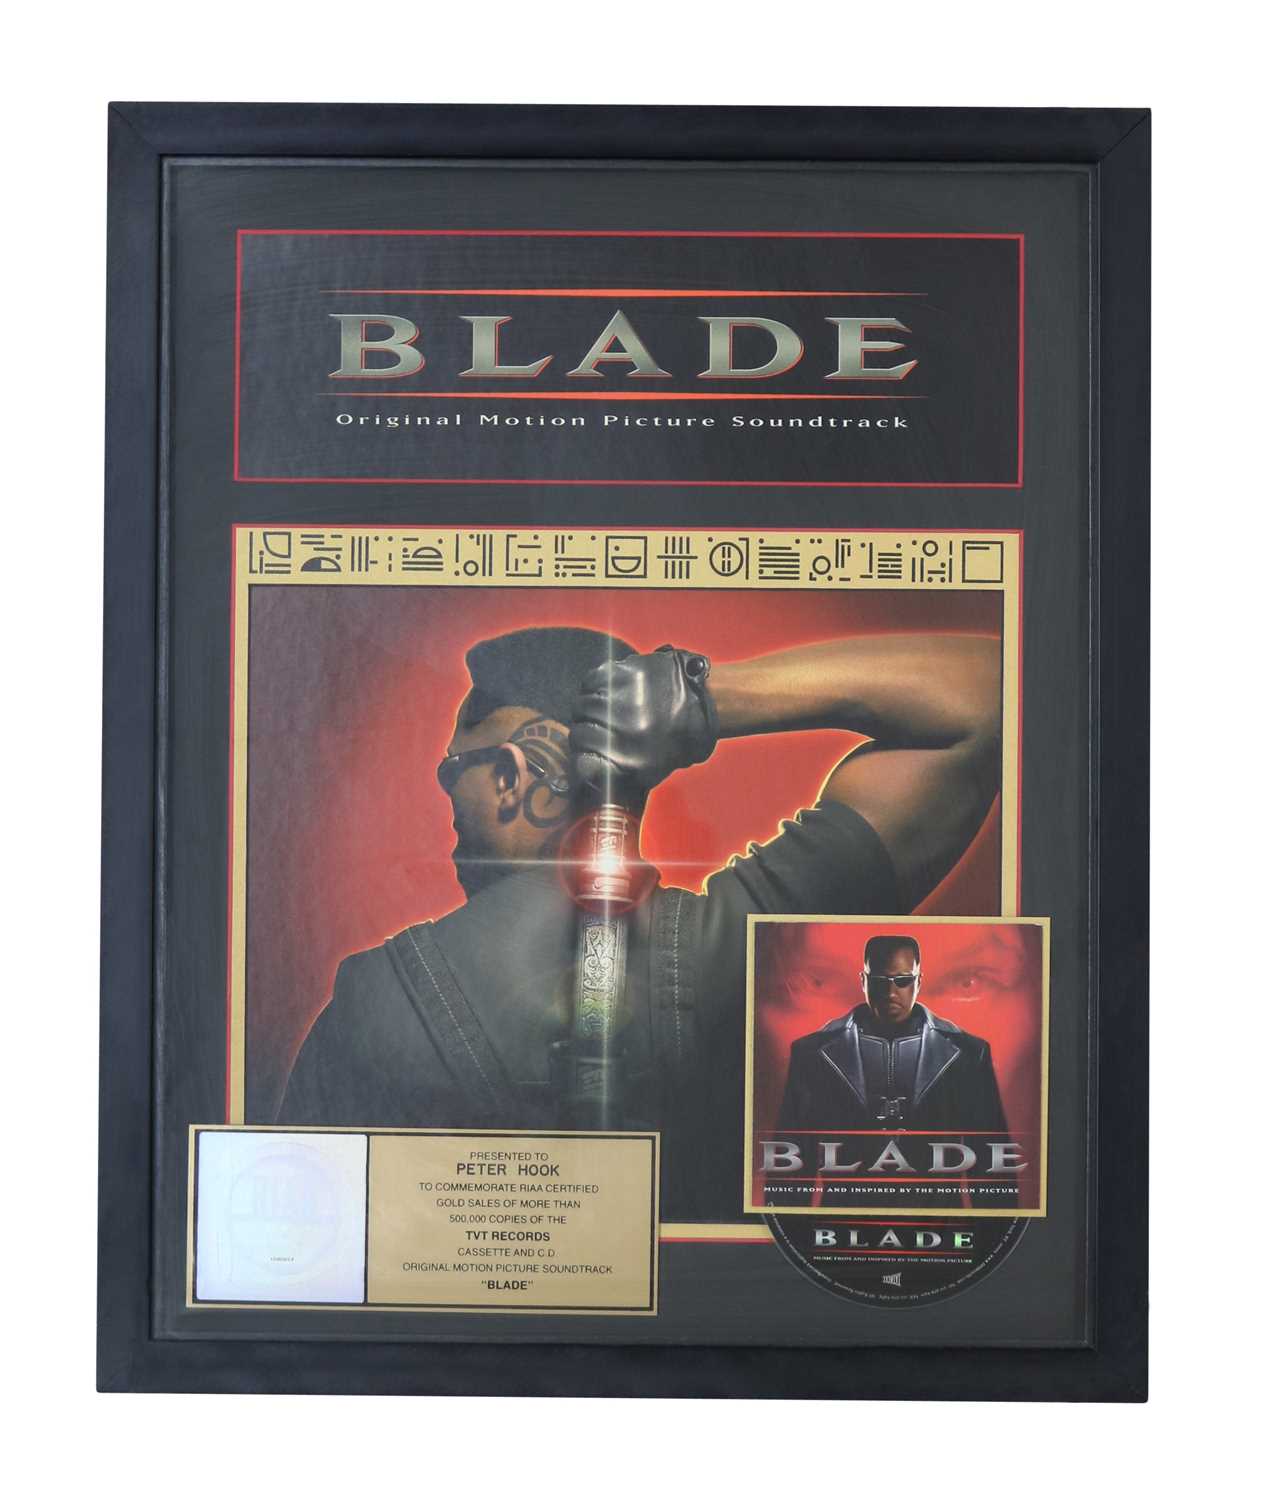 Lot 52 - NEW ORDER GOLD RIAA AWARD FOR BLADE SOUNDTRACK